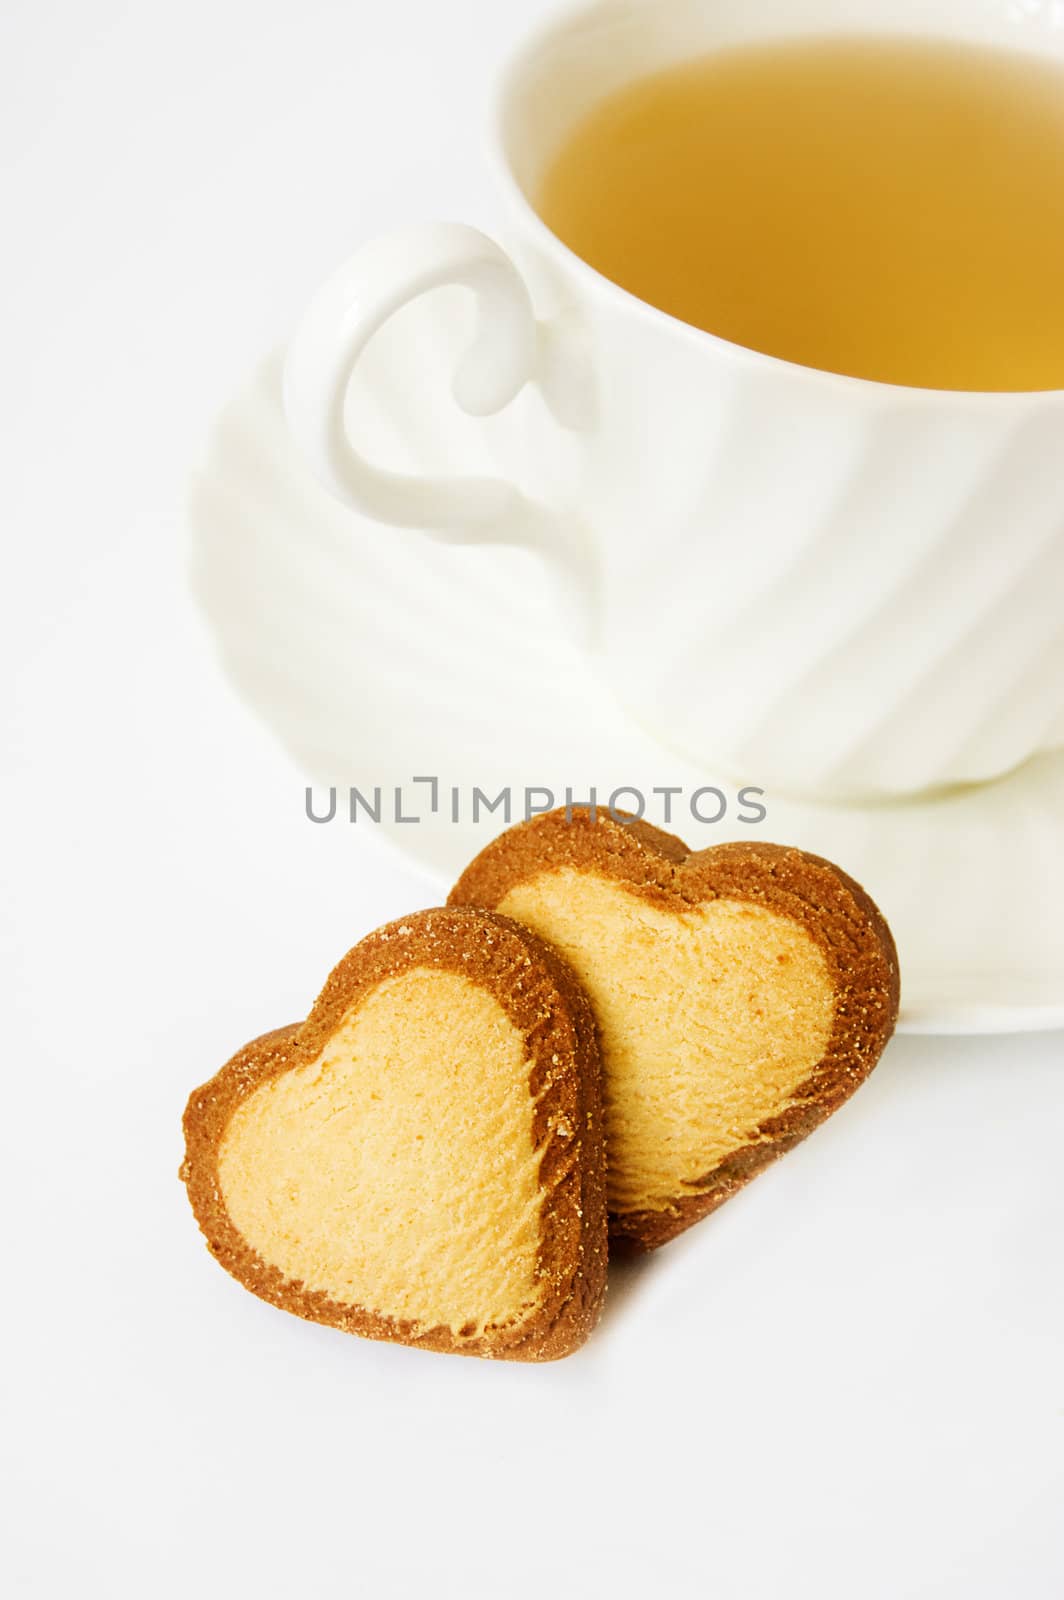 Tea and heart shaped biscuits by Angel_a